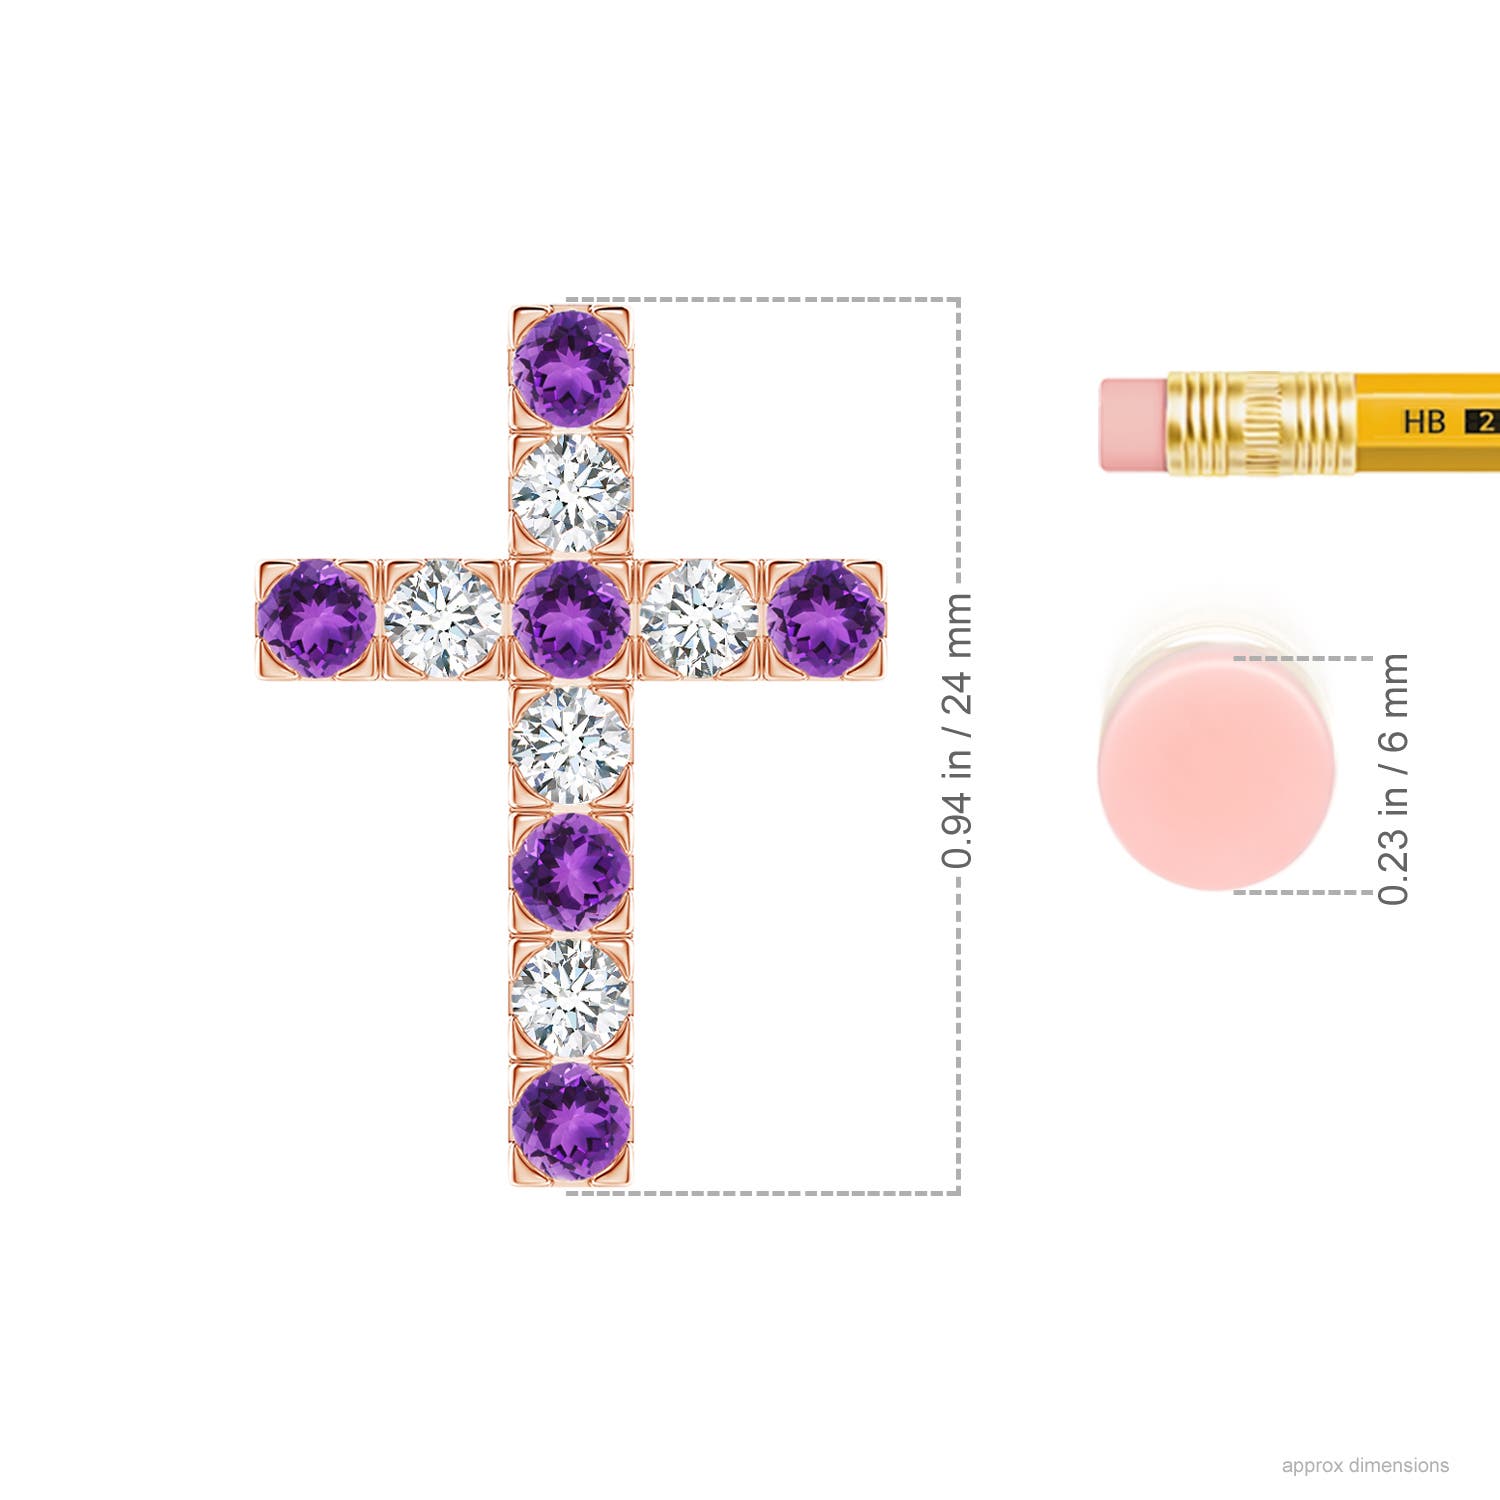 AAA - Amethyst / 1.13 CT / 14 KT Rose Gold